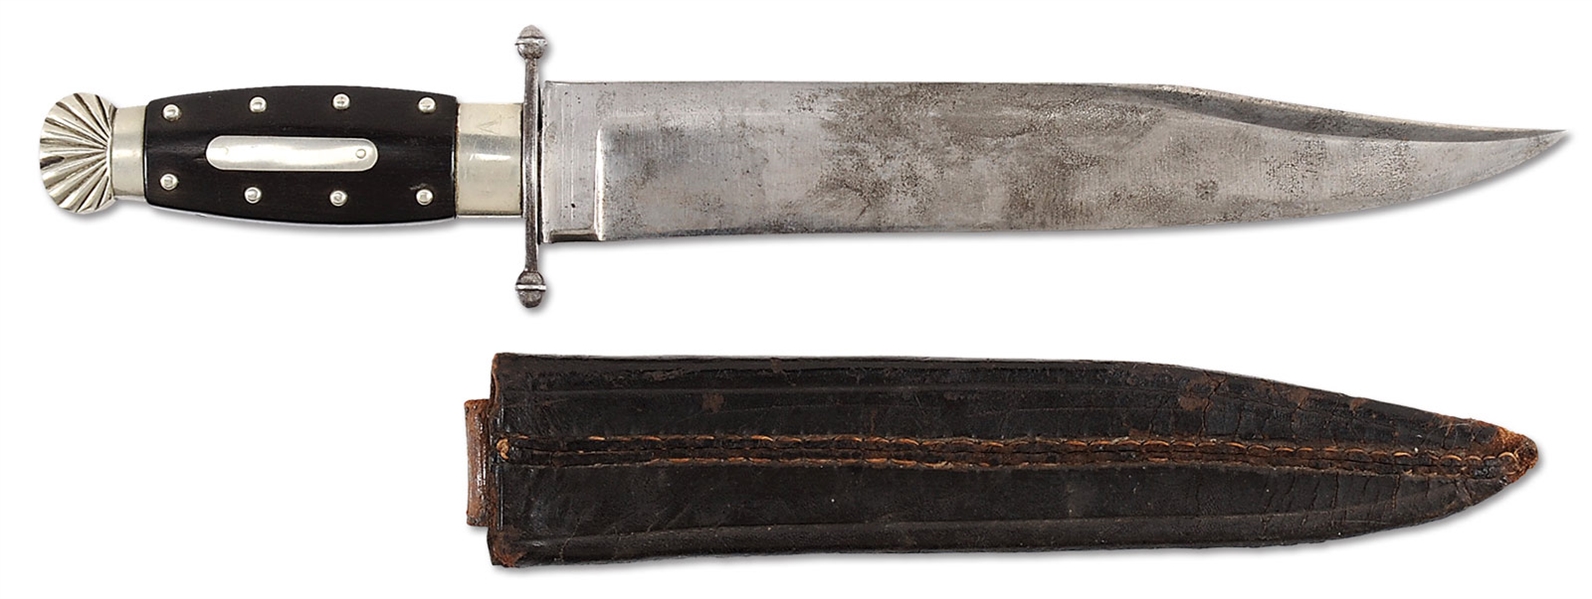 RARE "ROSE, NEW YORK" EARLY AMERICAN BOWIE KNIFE.                                                                                                                                                       